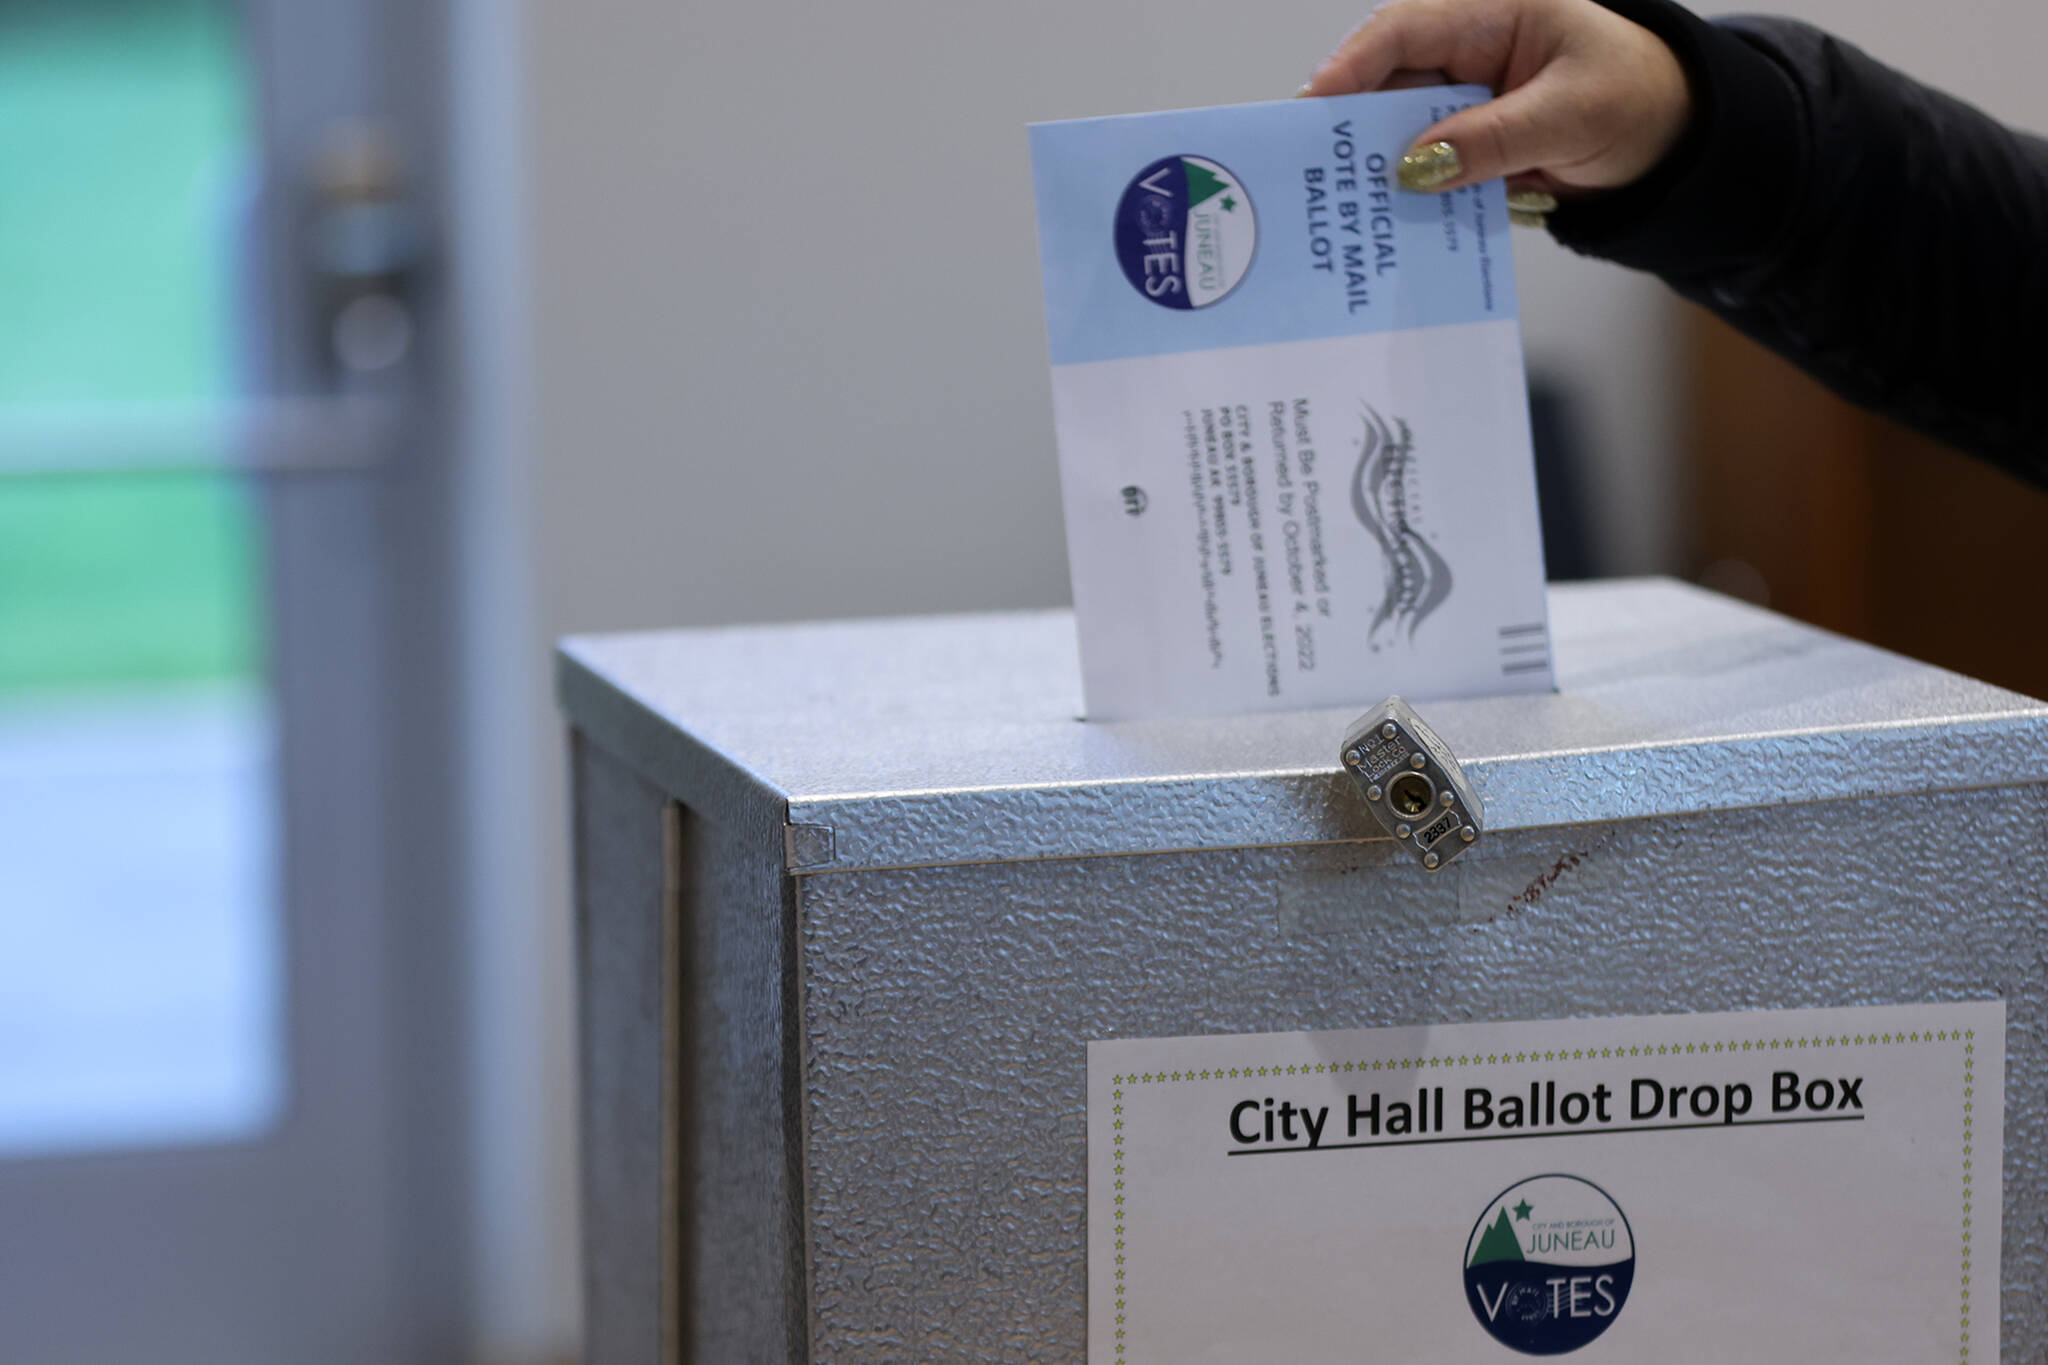 A ballot is placed in a drop box on Tuesday, Oct. 4, during the City and Borough of Juneau municipal election. Voters could cast ballots by mail, at voting centers located at City Hall and the Mendenhall Valley Public Library or at secure drop boxes at Don D. Statter Harbor and at the Douglas Public Library/ Fire Station. (Ben Hohenstatt / Juneau Empire File)